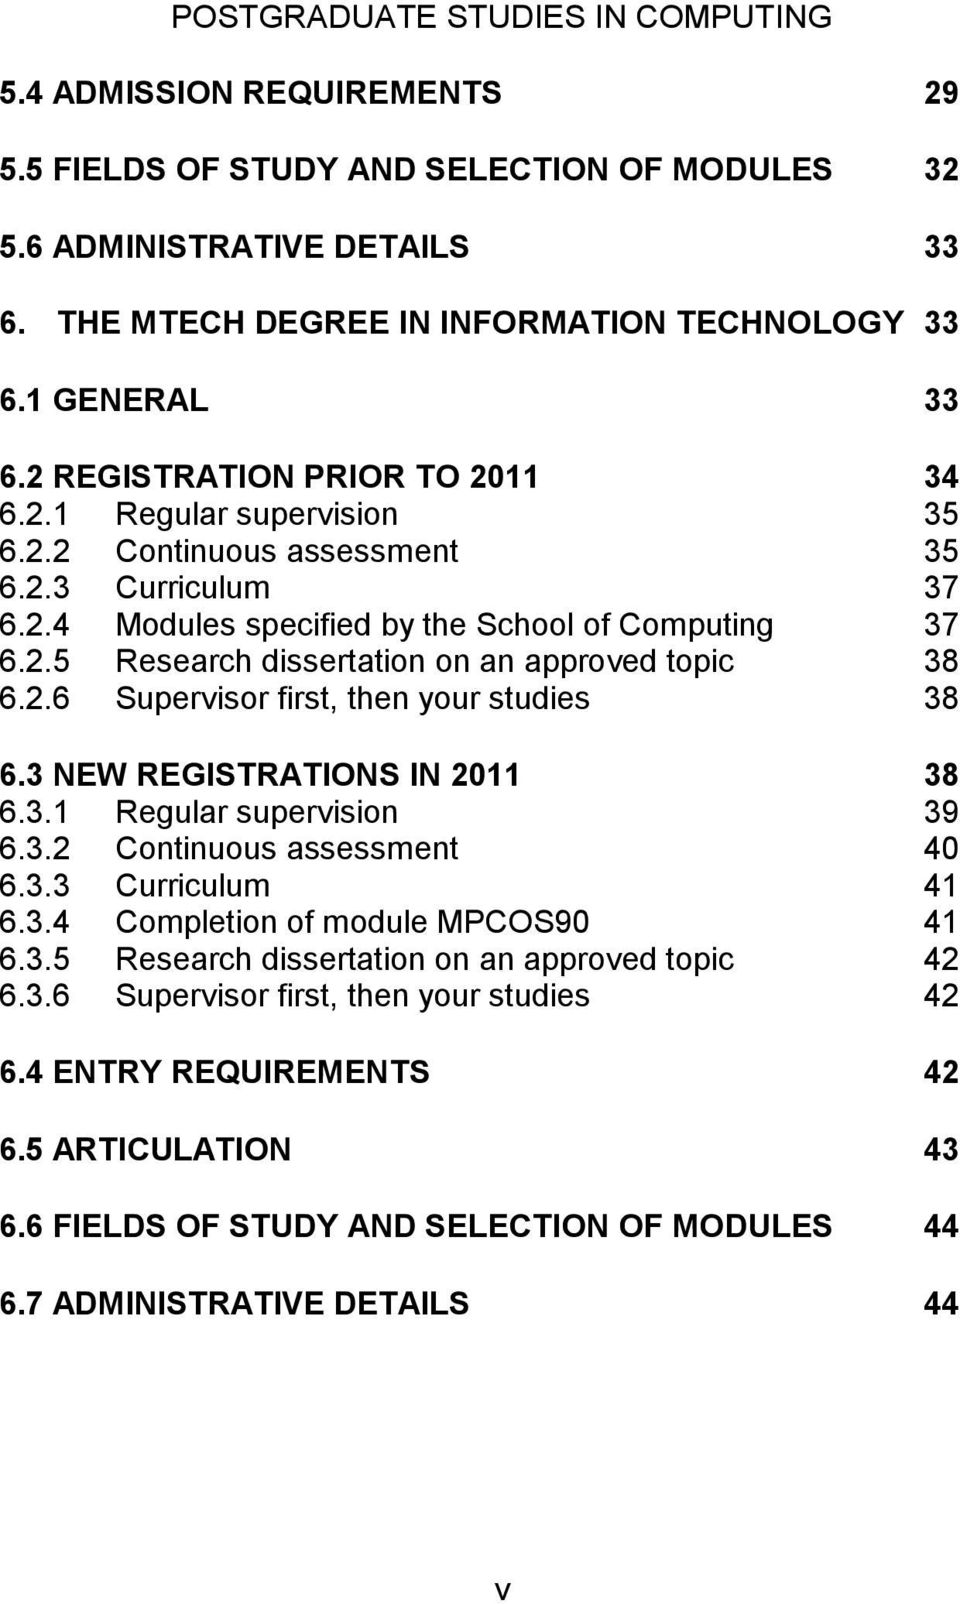 2.6 Supervisor first, then your studies 38 6.3 NEW REGISTRATIONS IN 2011 38 6.3.1 Regular supervision 39 6.3.2 Continuous assessment 40 6.3.3 Curriculum 41 6.3.4 Completion of module MPCOS90 41 6.3.5 Research dissertation on an approved topic 42 6.